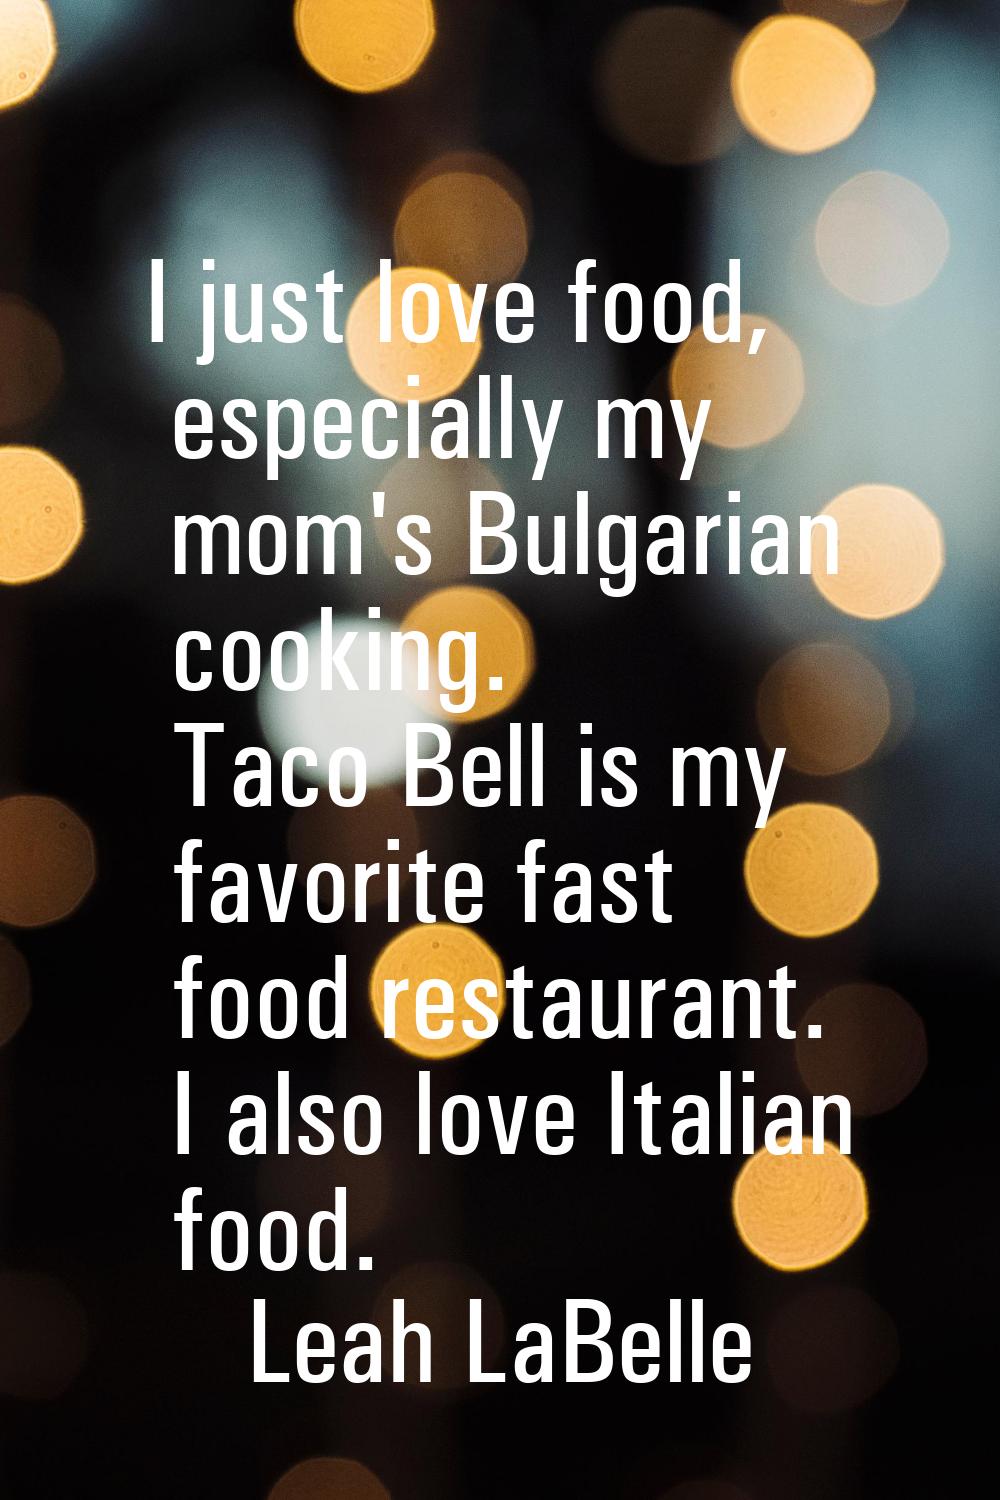 I just love food, especially my mom's Bulgarian cooking. Taco Bell is my favorite fast food restaur